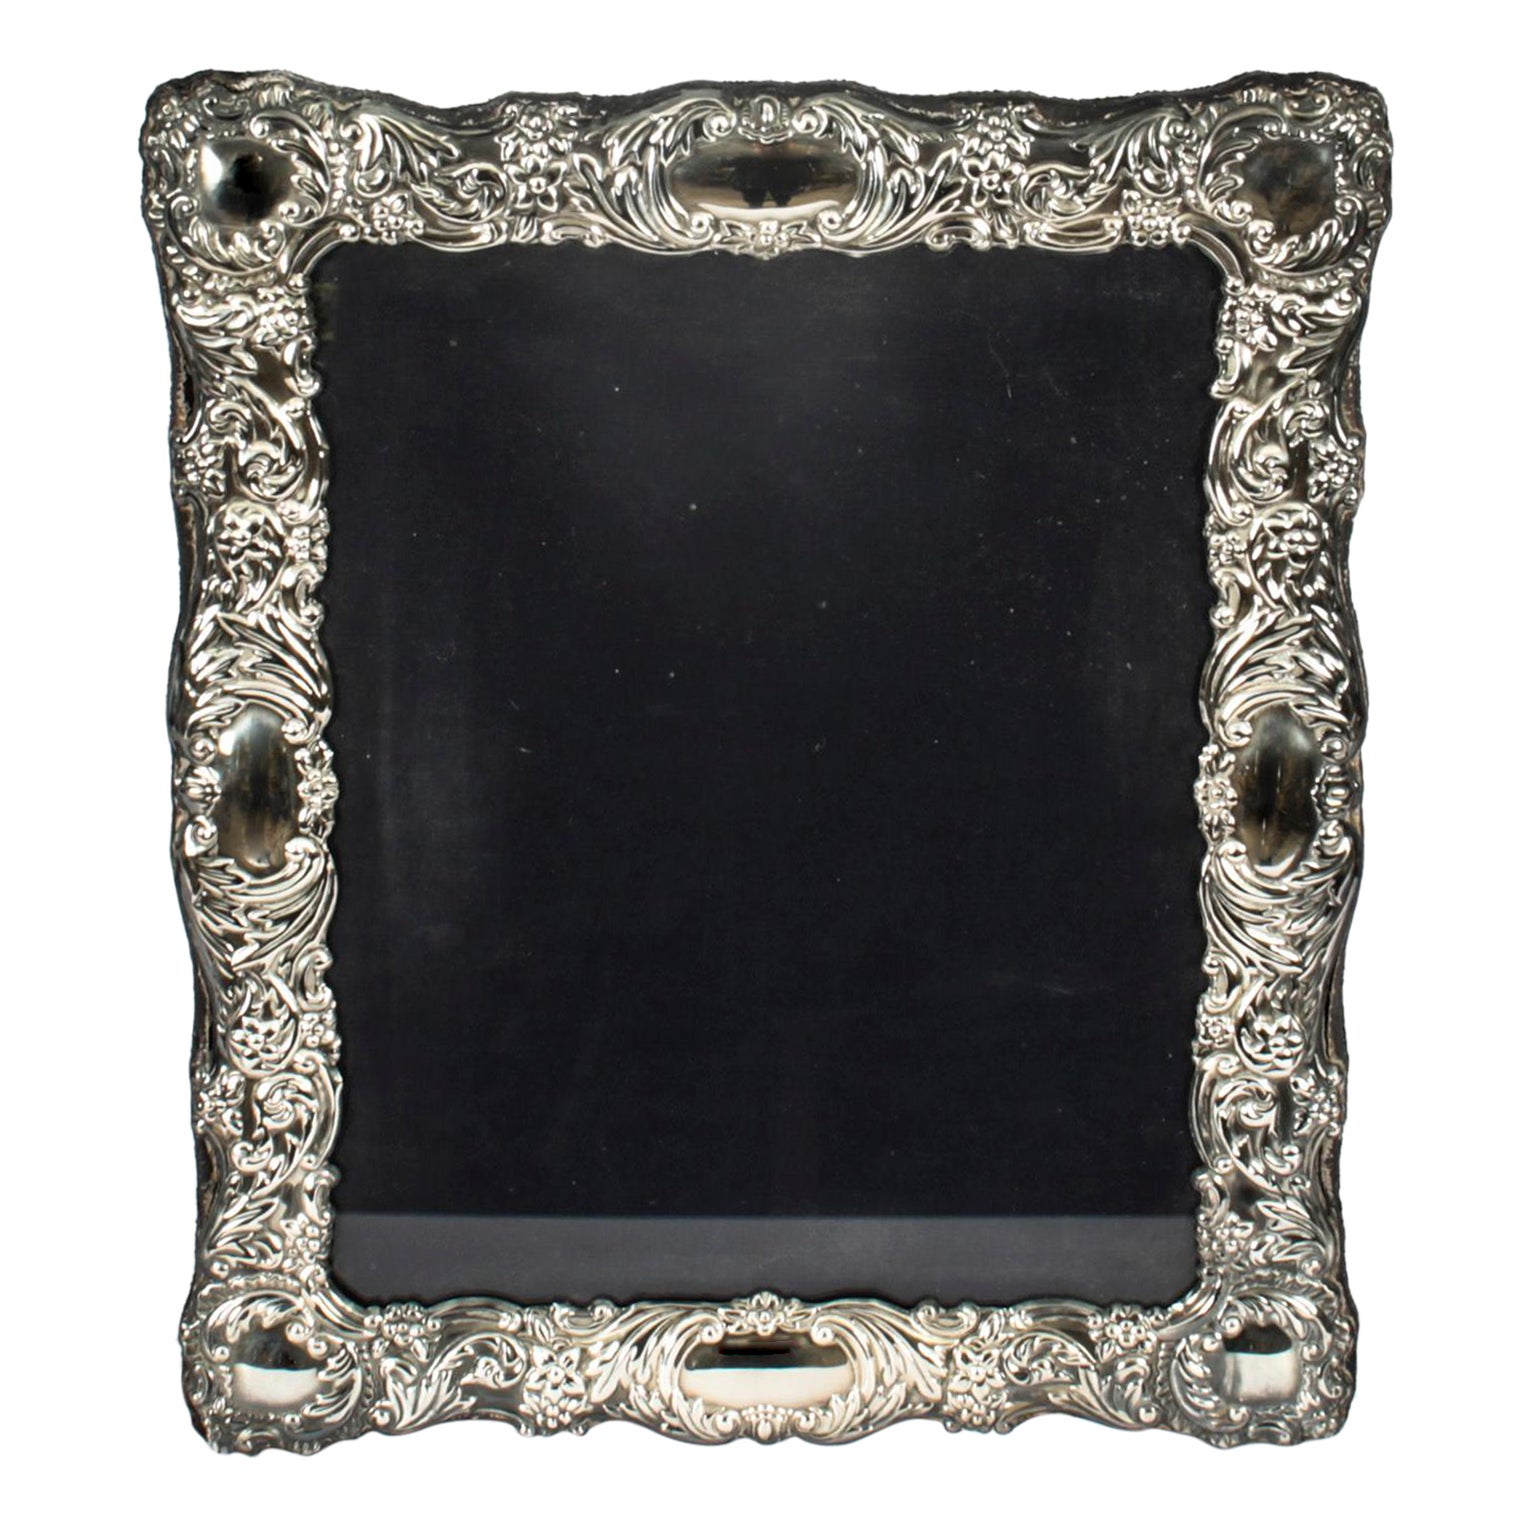 Vintage Sterling Silver Photo Frame by Carrs of Sheffield 20thC